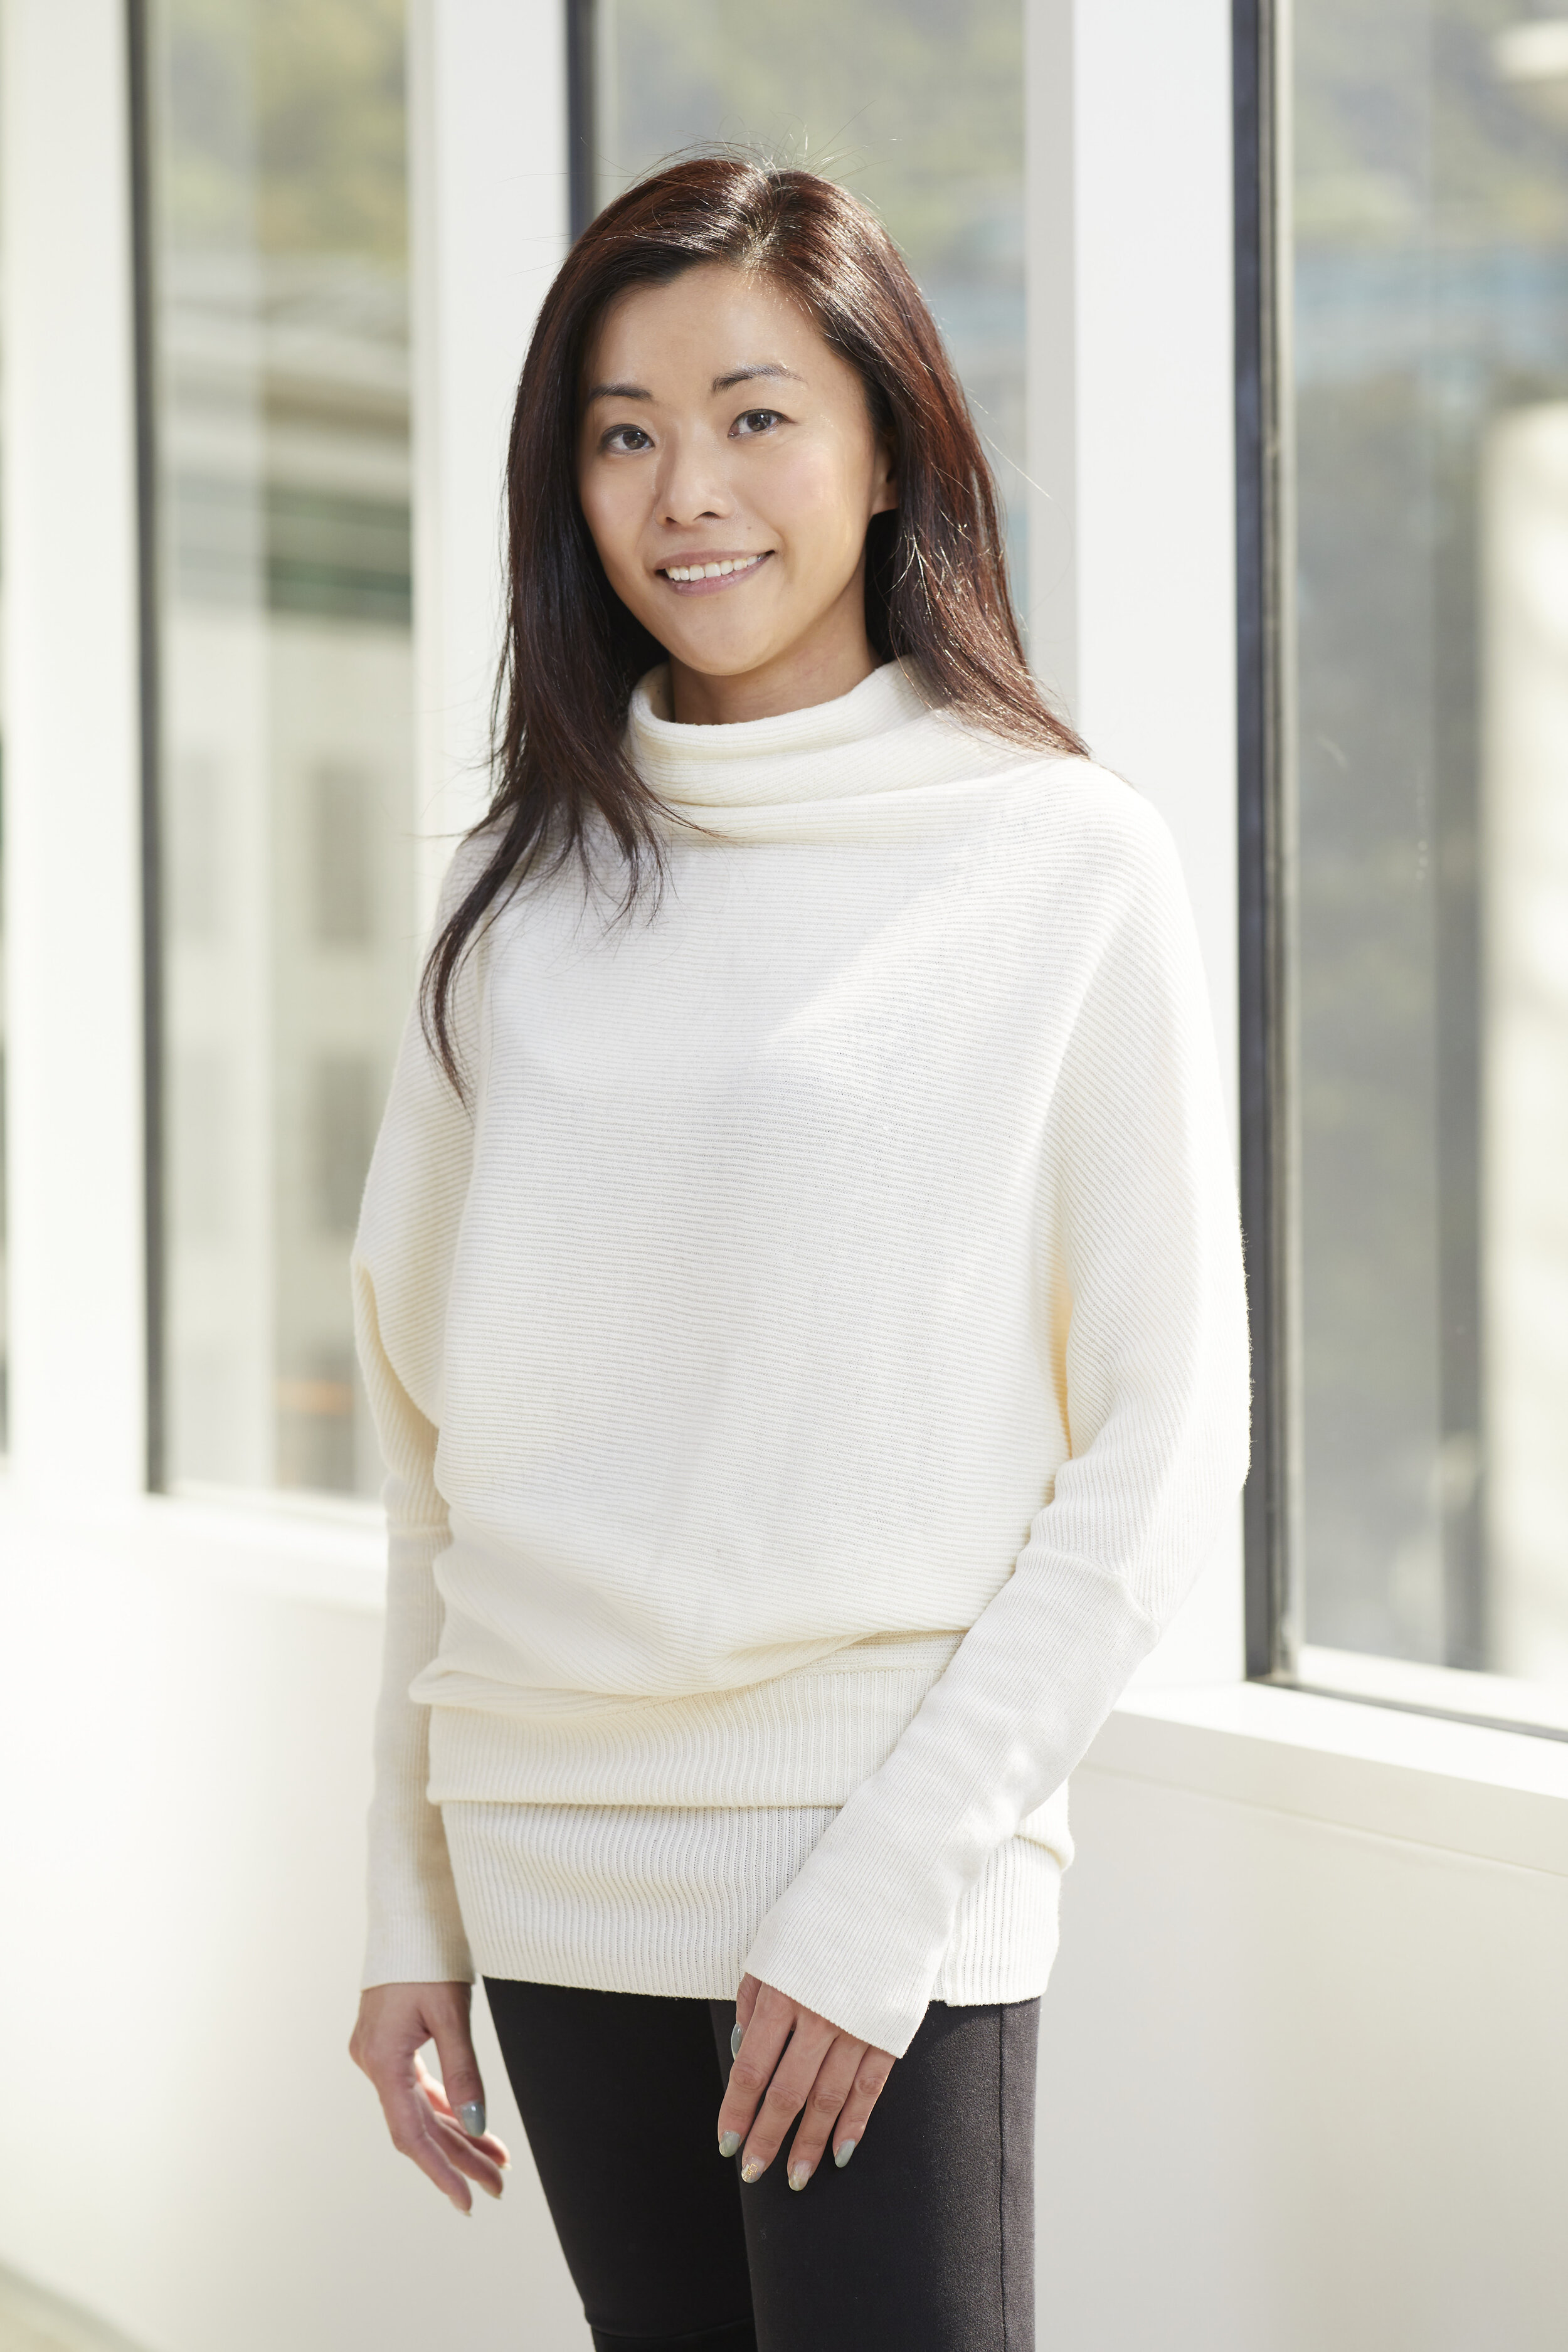 Peggy Choi, founder and CEO, LYNK for Visa Hong Kong She's Next